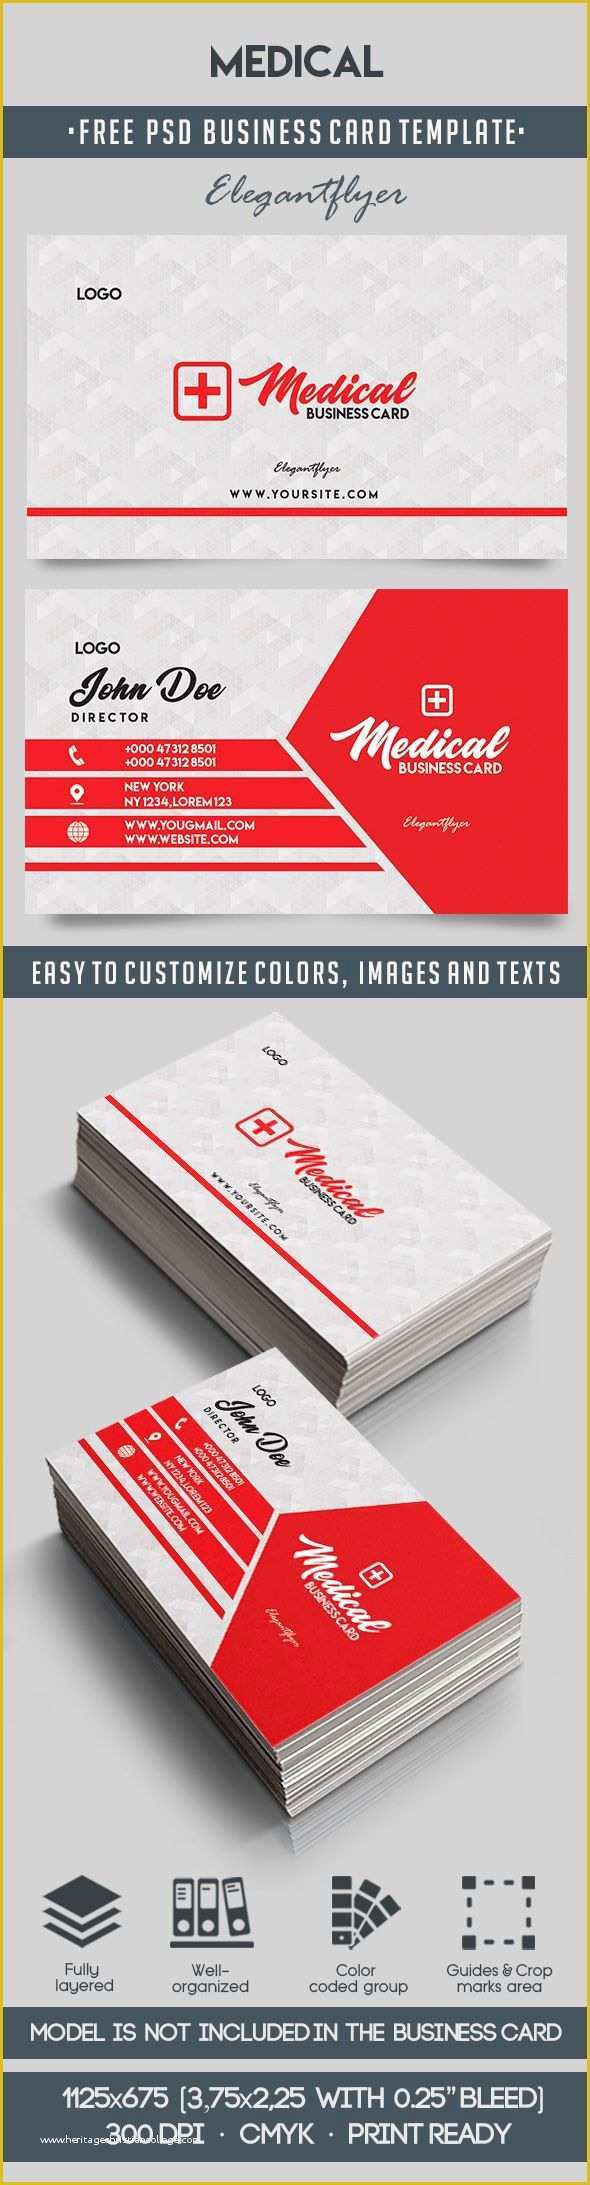 Medical Business Cards Templates Free Of Medical – Free Business Card Templates Psd – by Elegantflyer